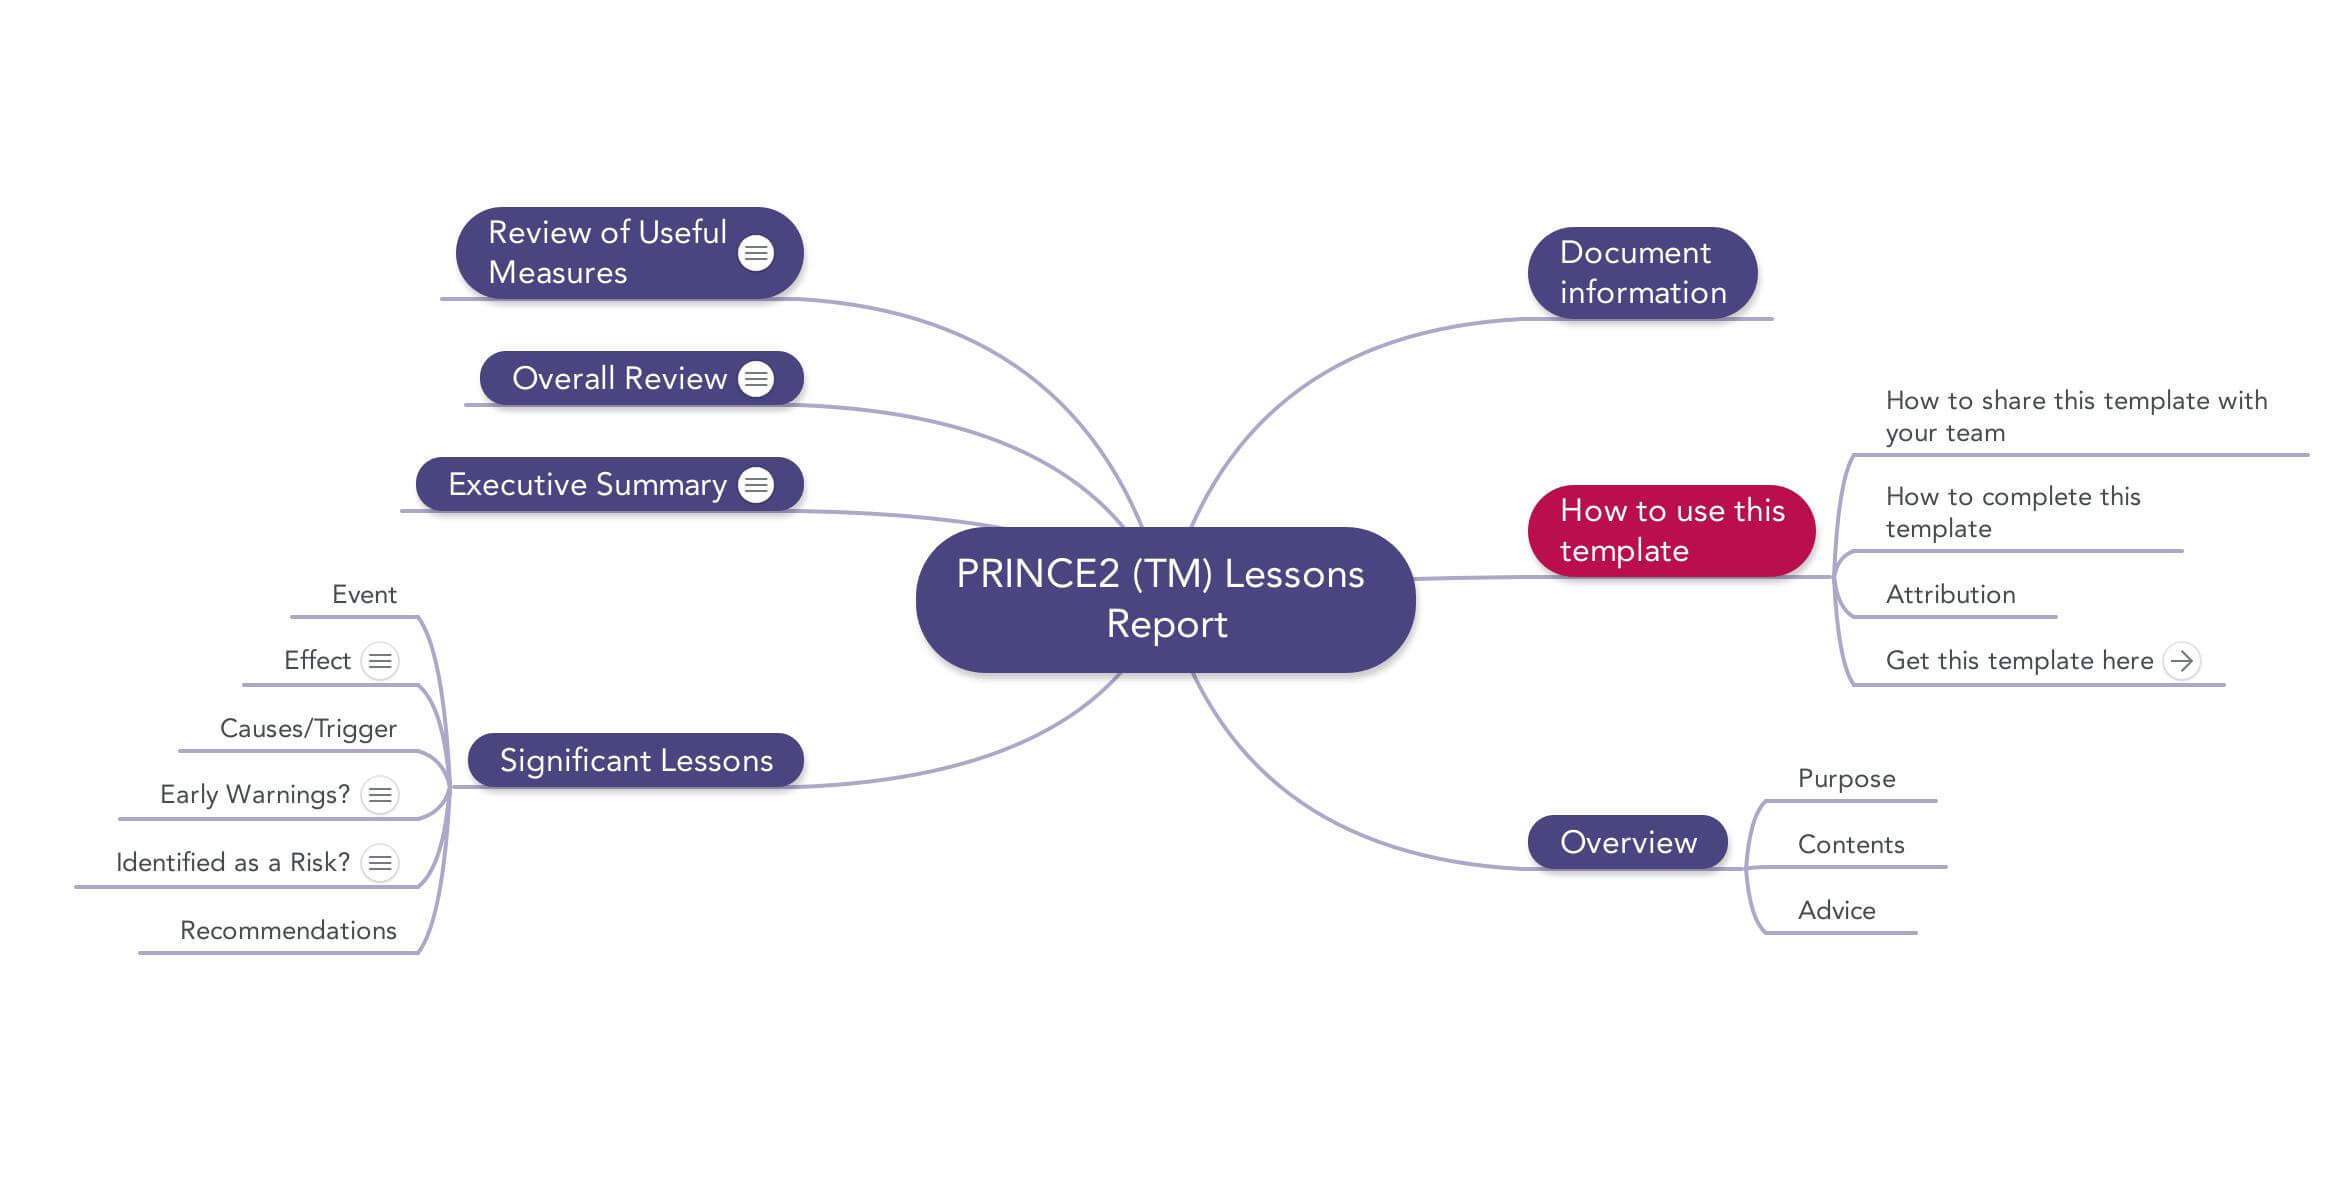 Prince2 Lessons Report | Download Template Regarding Prince2 Lessons Learned Report Template